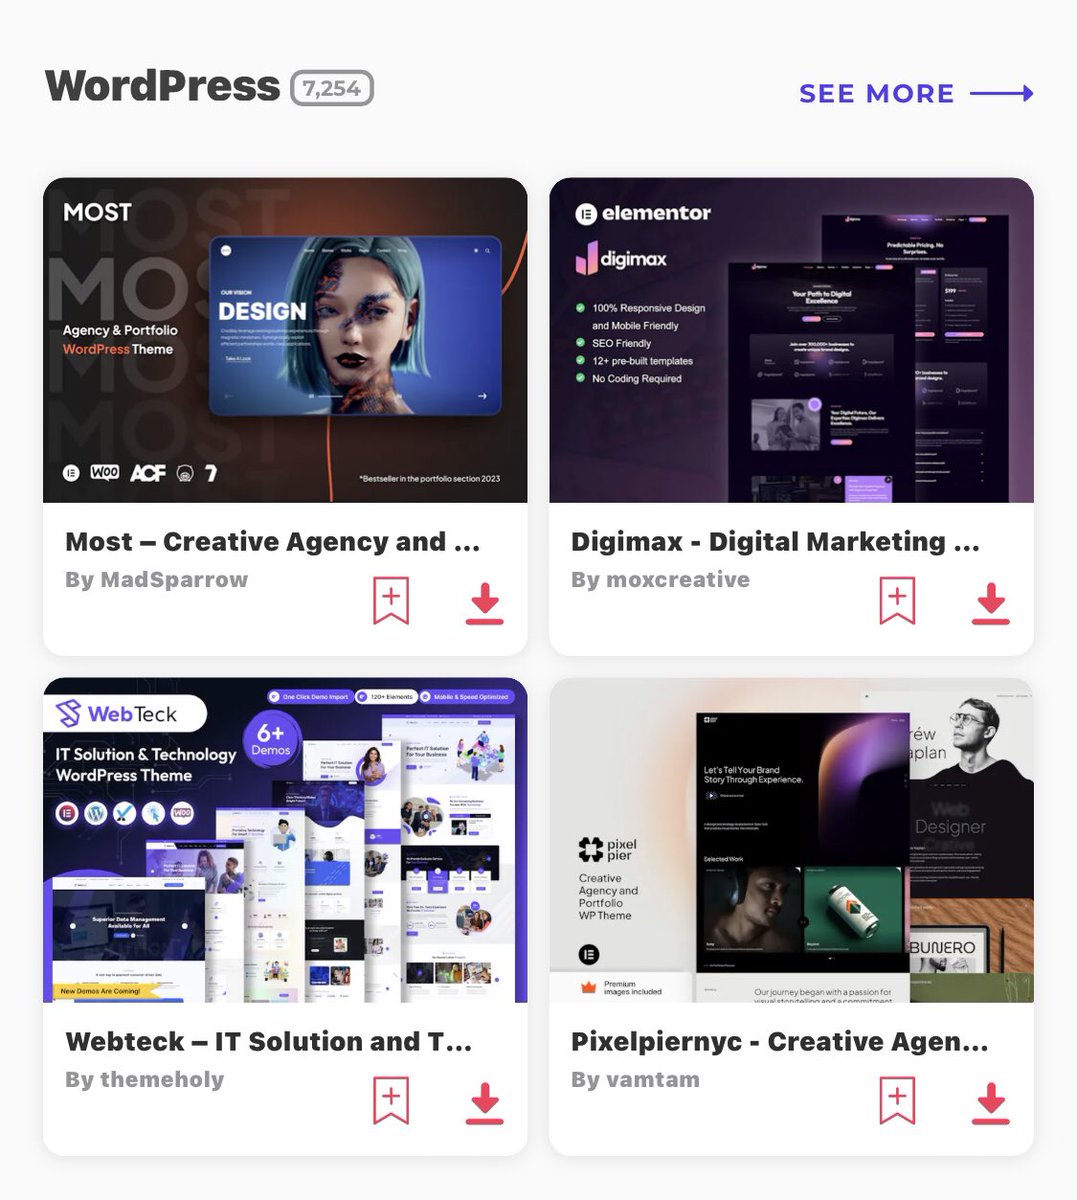 These are hand selected, high quality @WordPress themes, page templates, plugins and template kits. Hundreds of Elementor template kits within their own category. Refine by category, blog, portfolio, eCommerce and agency
@envato @EnvatoMarket @WordPress :1.envato.market/y2Mog2